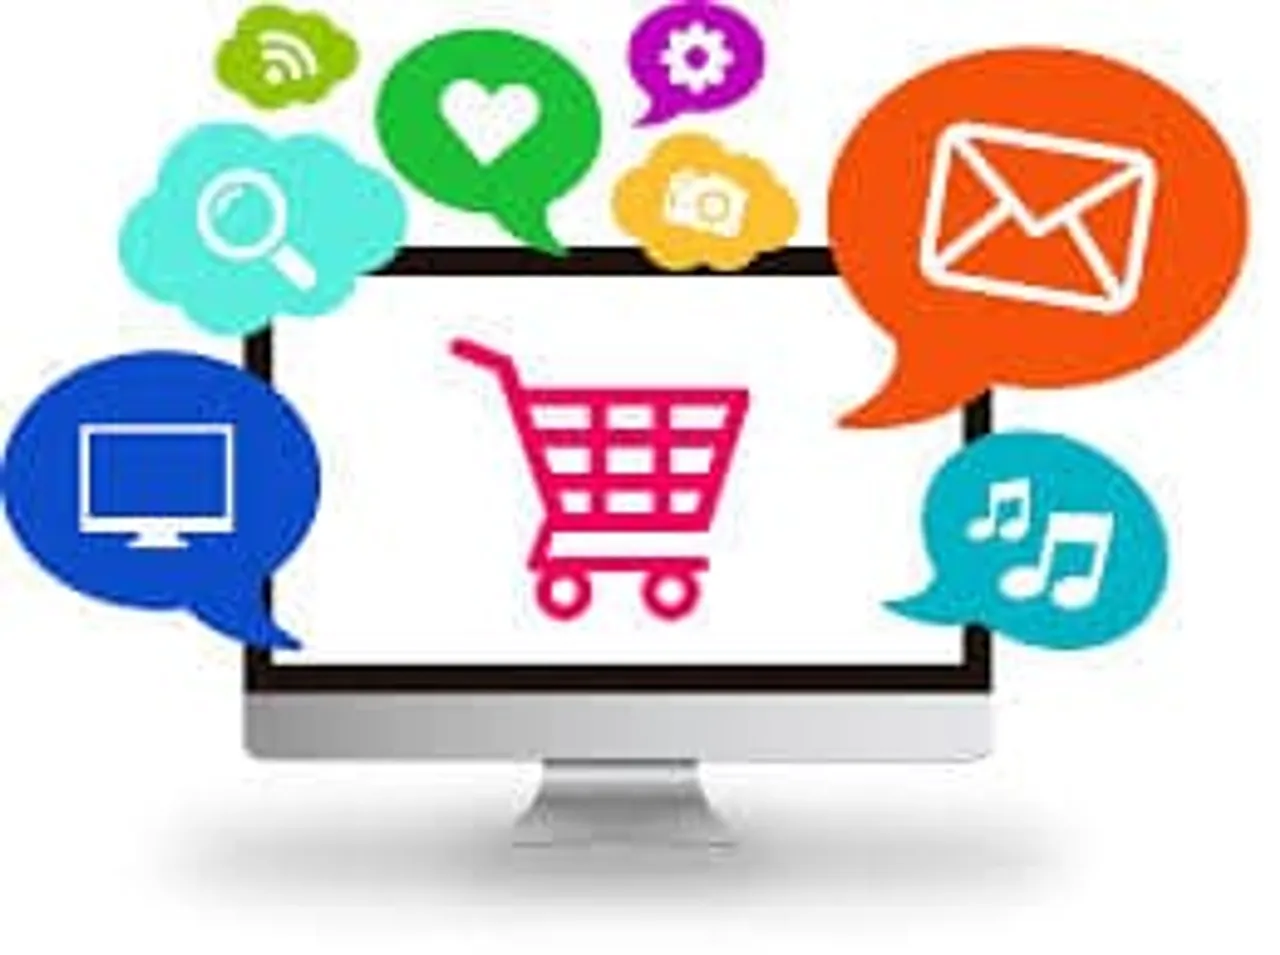 7 Key Trends That’ll Impact eCommerce in 2016